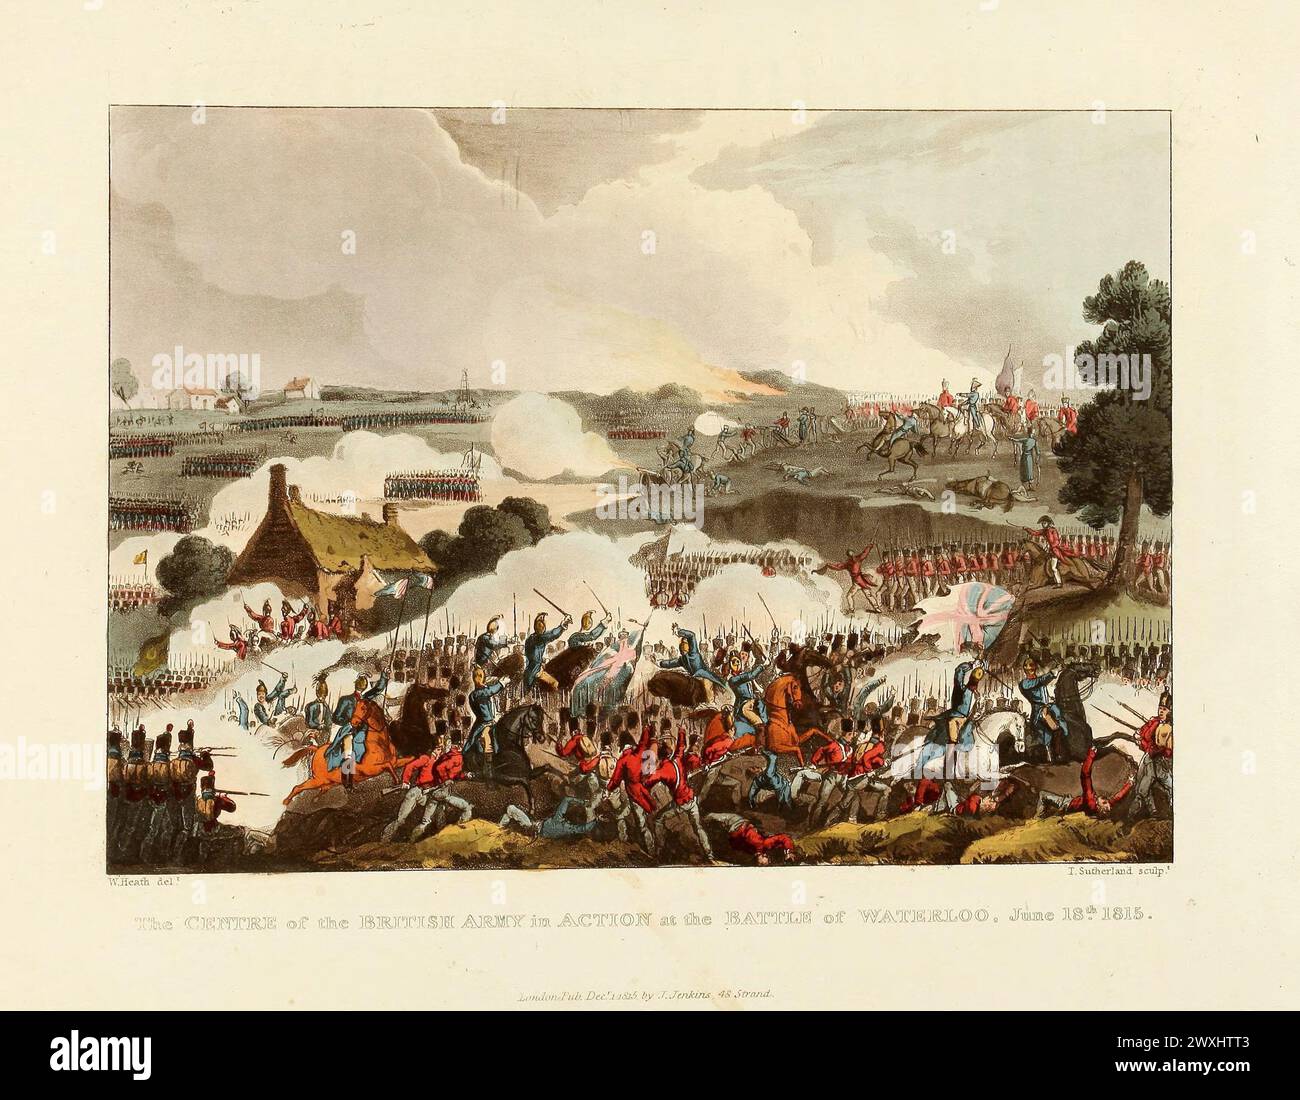 The Centre of the British Army in Action at the Battle of Waterloo, June 18, 1815. Vintage Coloured Aquatint, published by James Jenkins, 1815,  from  The martial achievements of Great Britain and her allies : from 1799 to 1815. Stock Photo